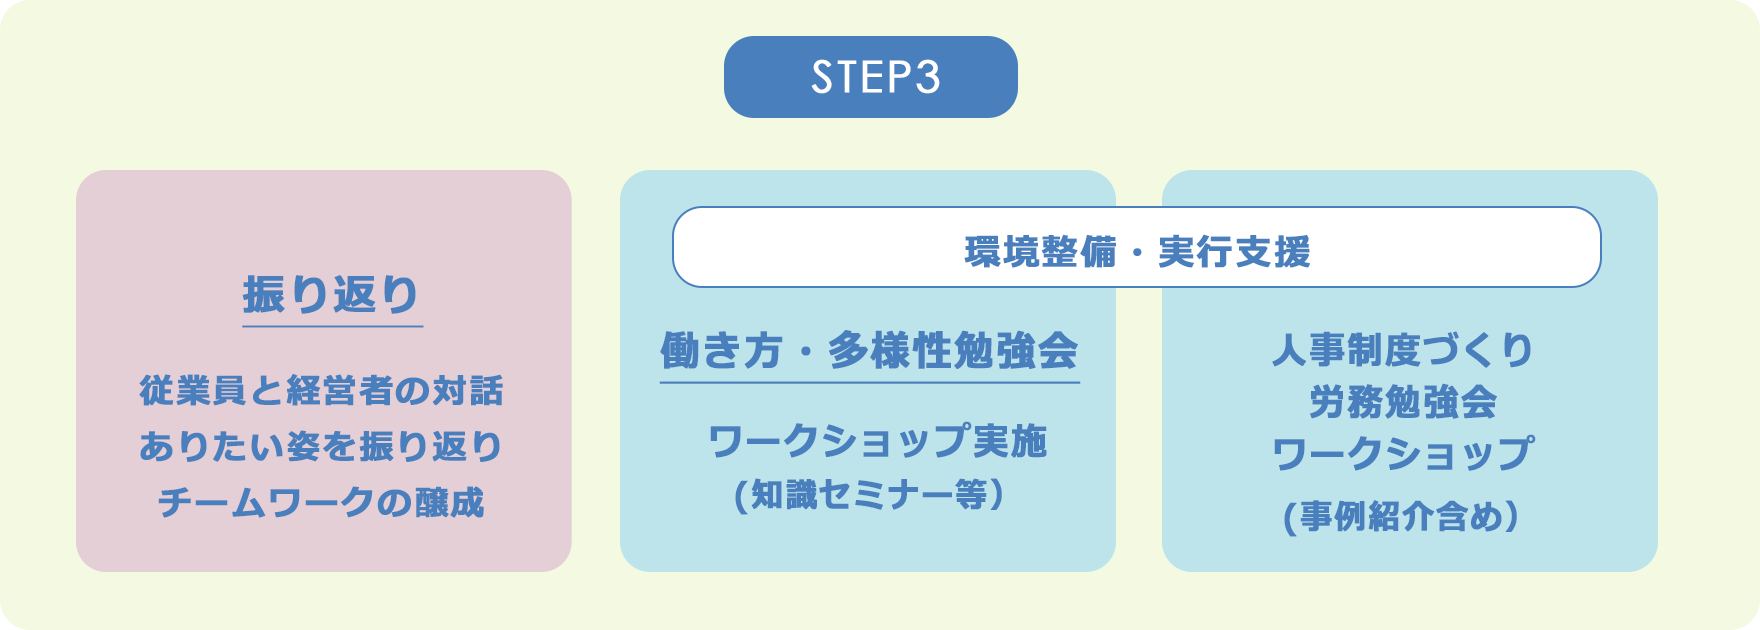 step3：従業員と経営者の対話やありたい姿を振り返りから、働き方・多様性勉強会や人事制度づくり労務勉強会